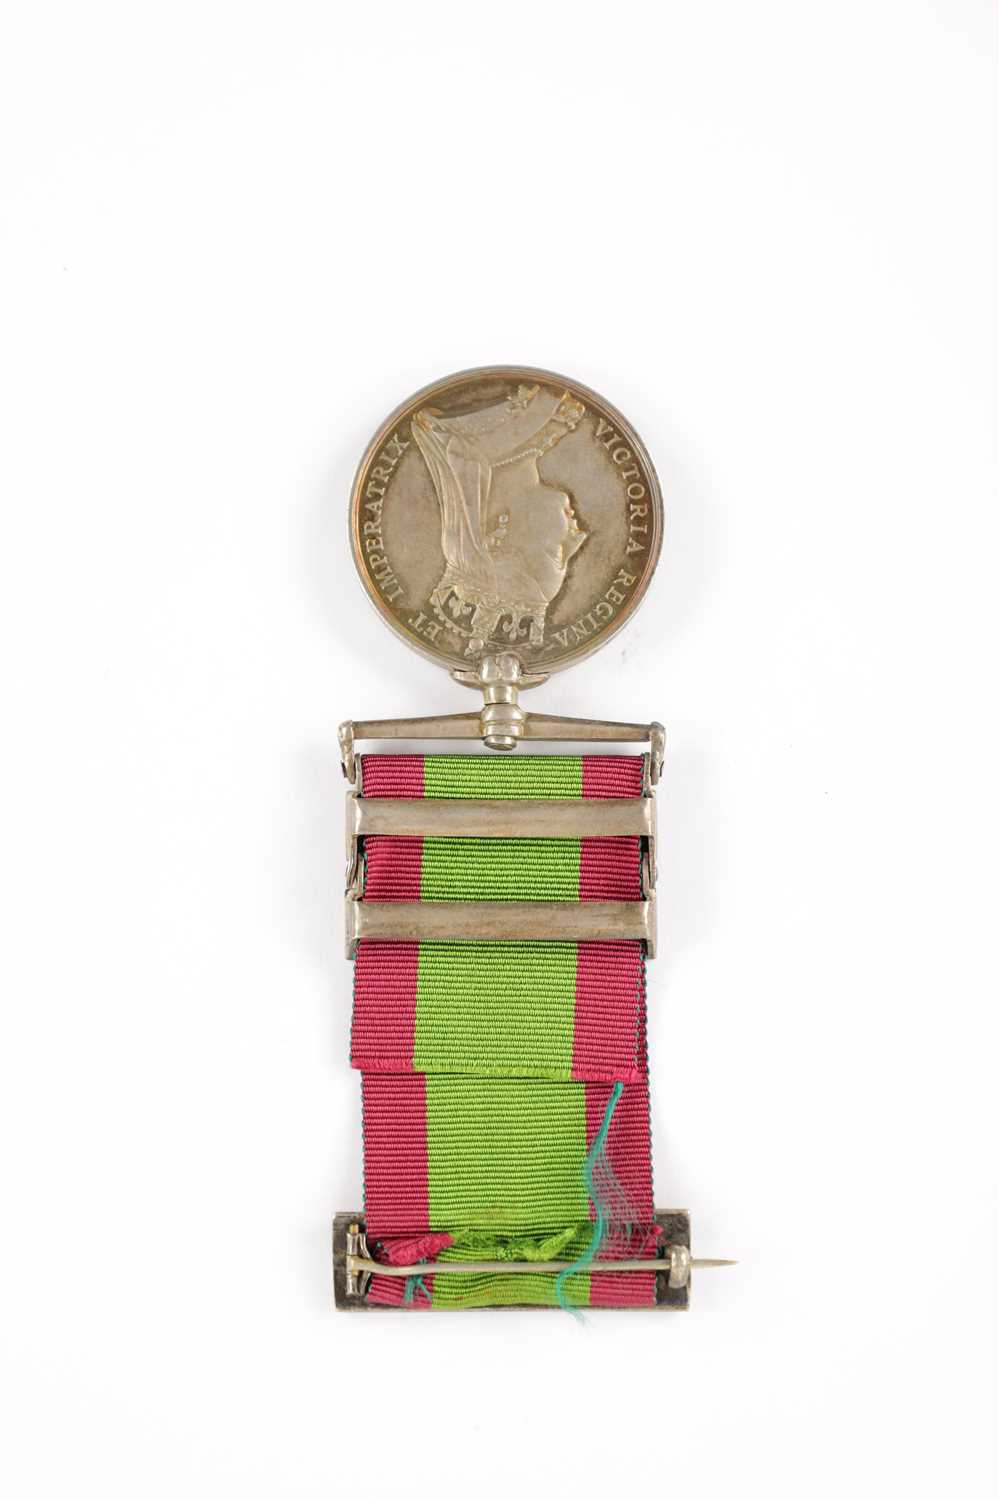 THE AFGHANISTAN MEDAL WITH TWO CLASPS - Image 3 of 5